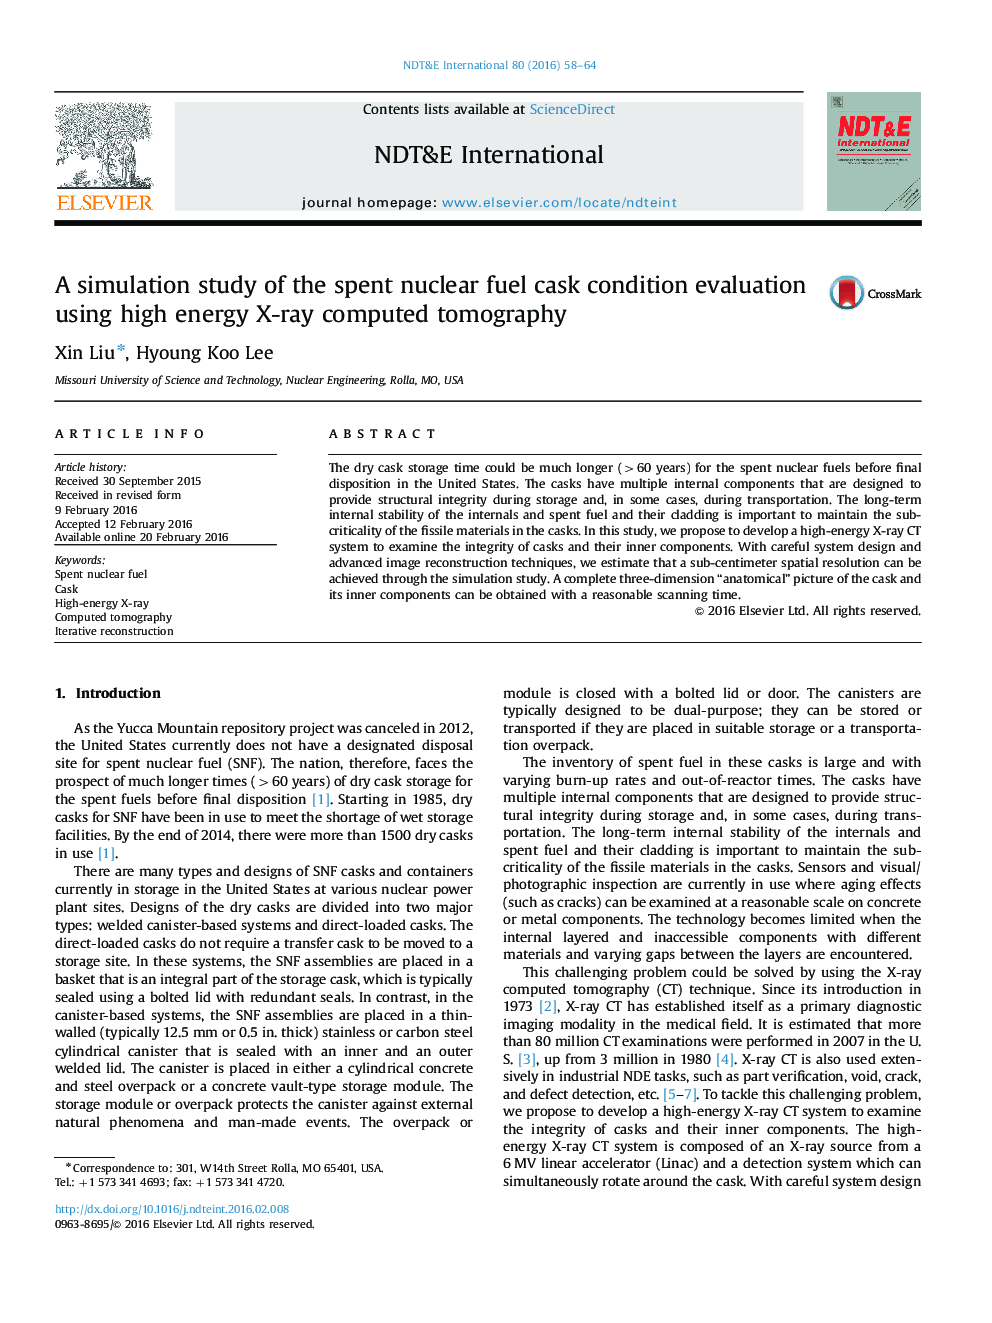 A simulation study of the spent nuclear fuel cask condition evaluation using high energy X-ray computed tomography